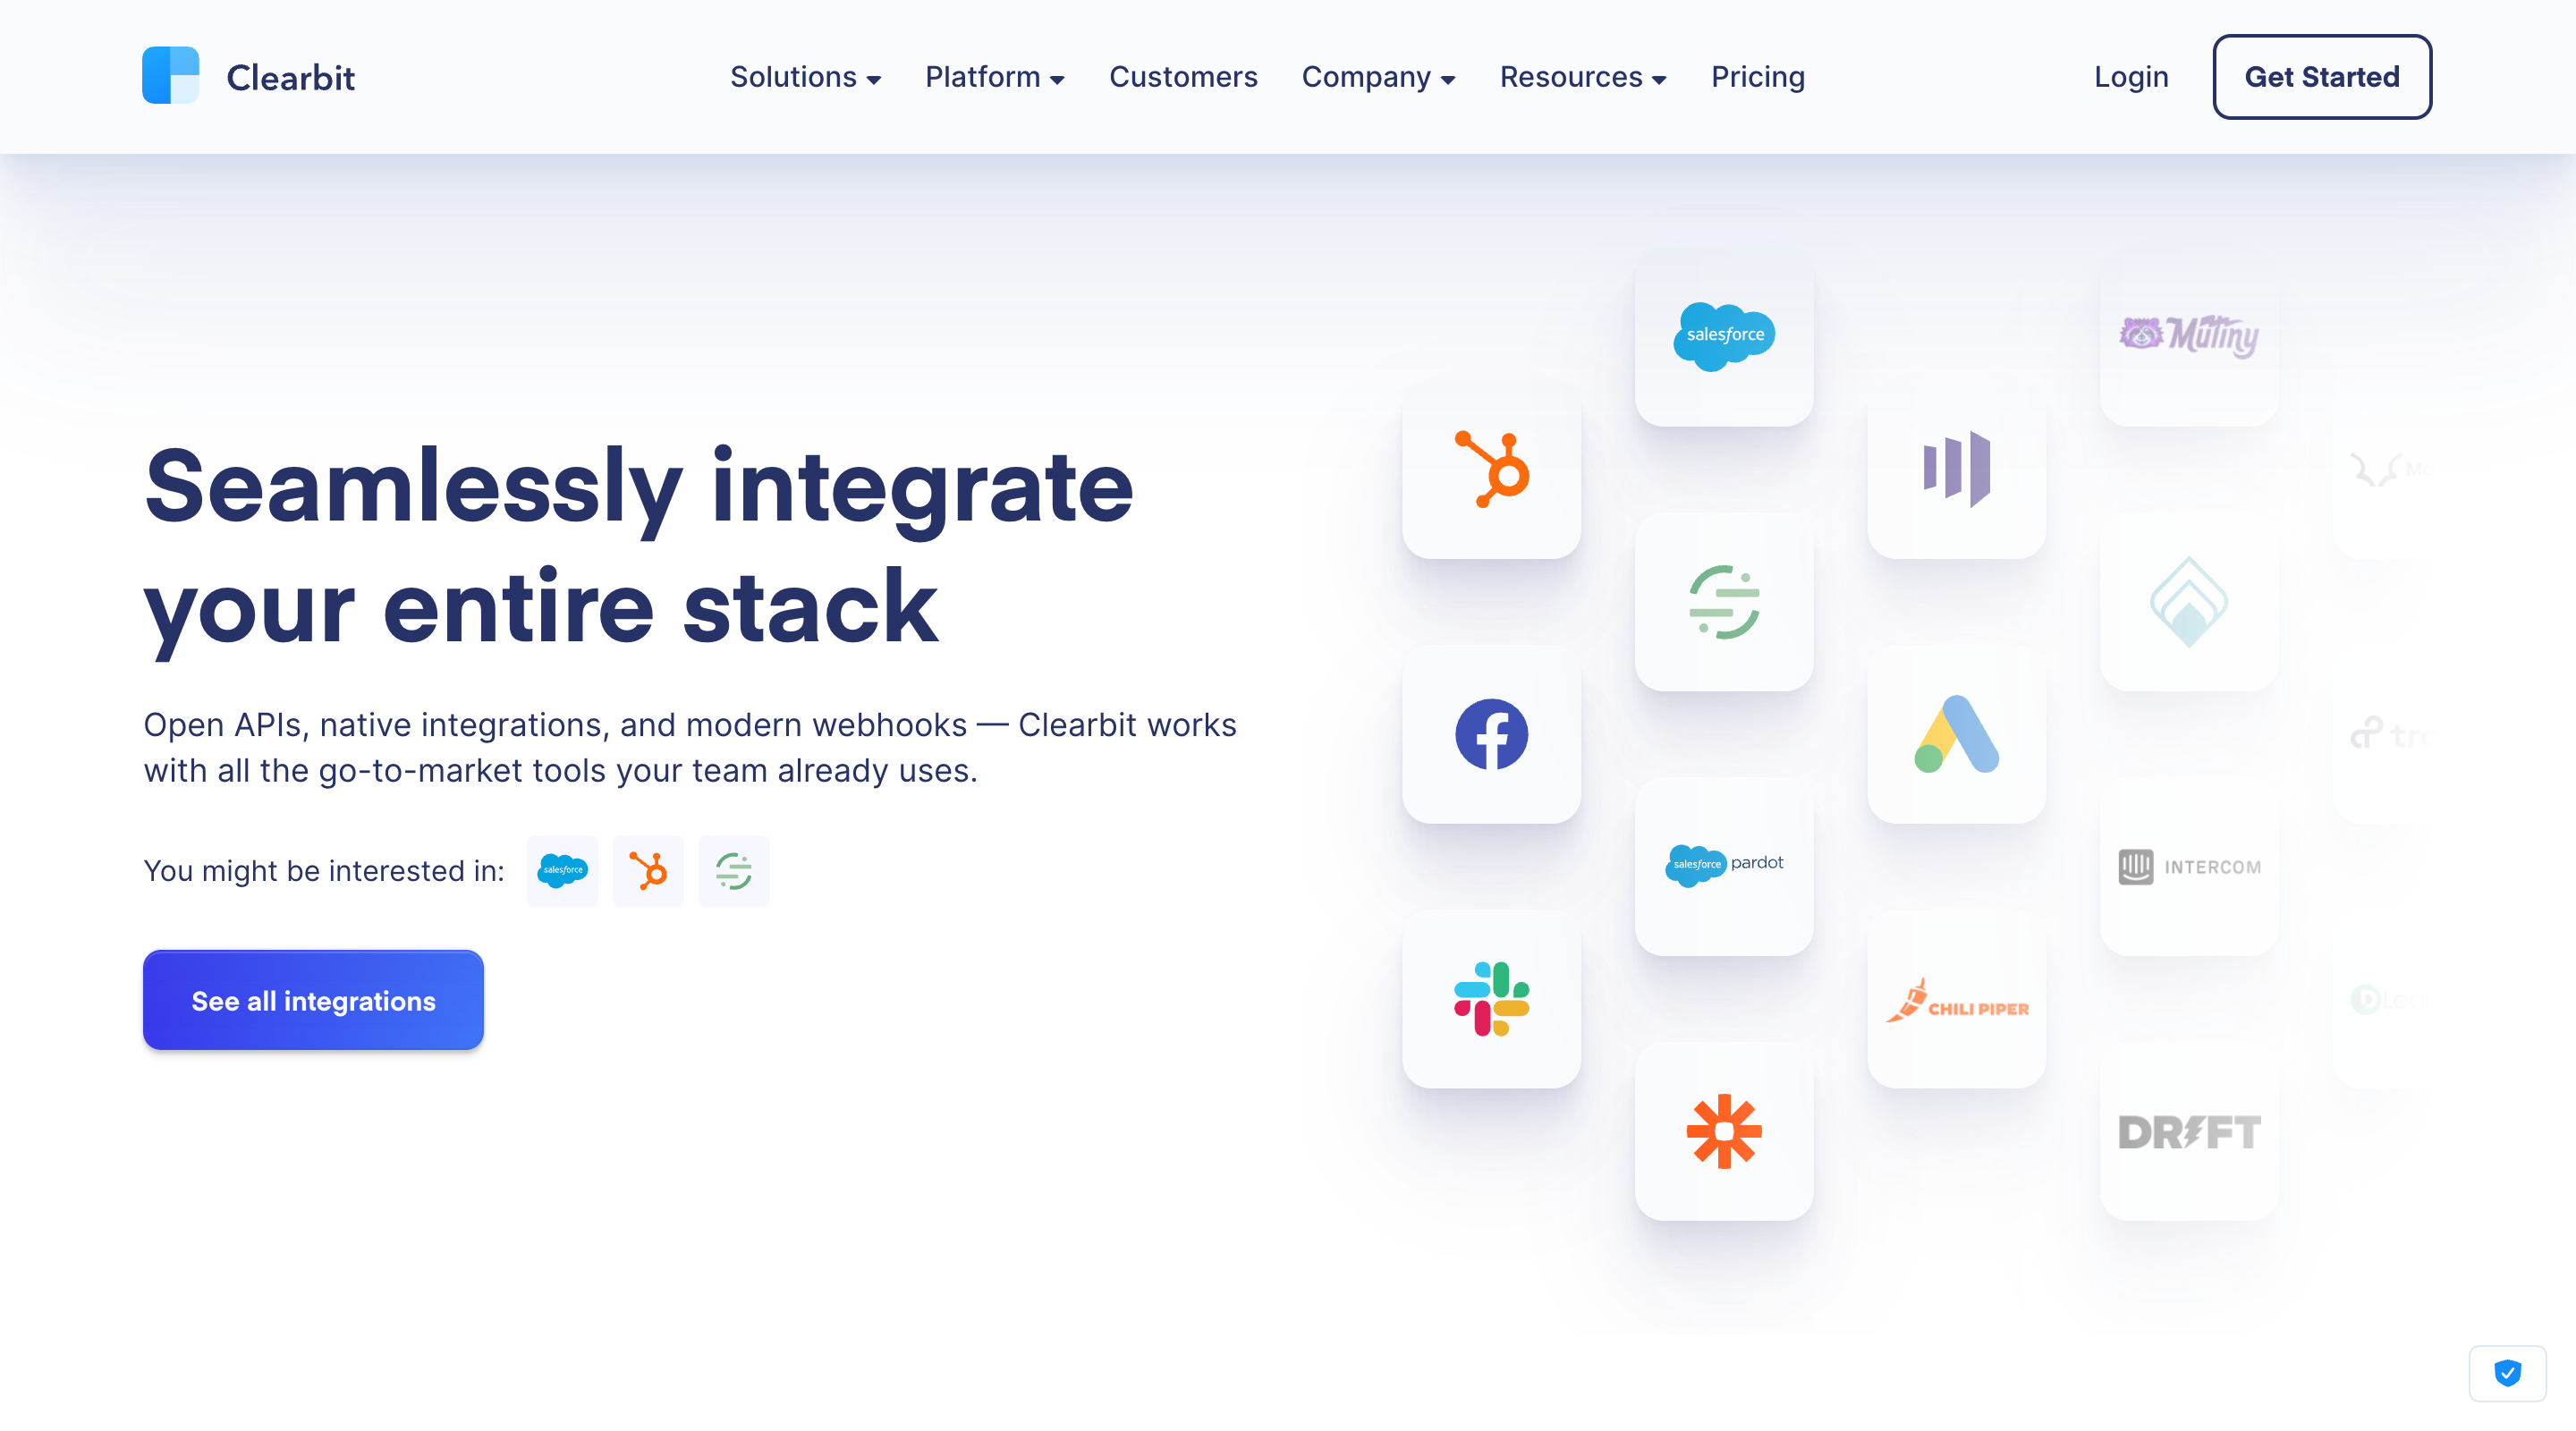 Screenshot of the 'Seamlessly integrate your entire stack' section of the Clearbit website. A header contains the logo, the primary site navigation, and calls-to-action to 'Login' or 'Get Started'. The left side of the page contains a short paragraph and a 'See all integrations' call-to-action. On the right is an assortment of third-party company logos representing the integrations that Clearbit provide.